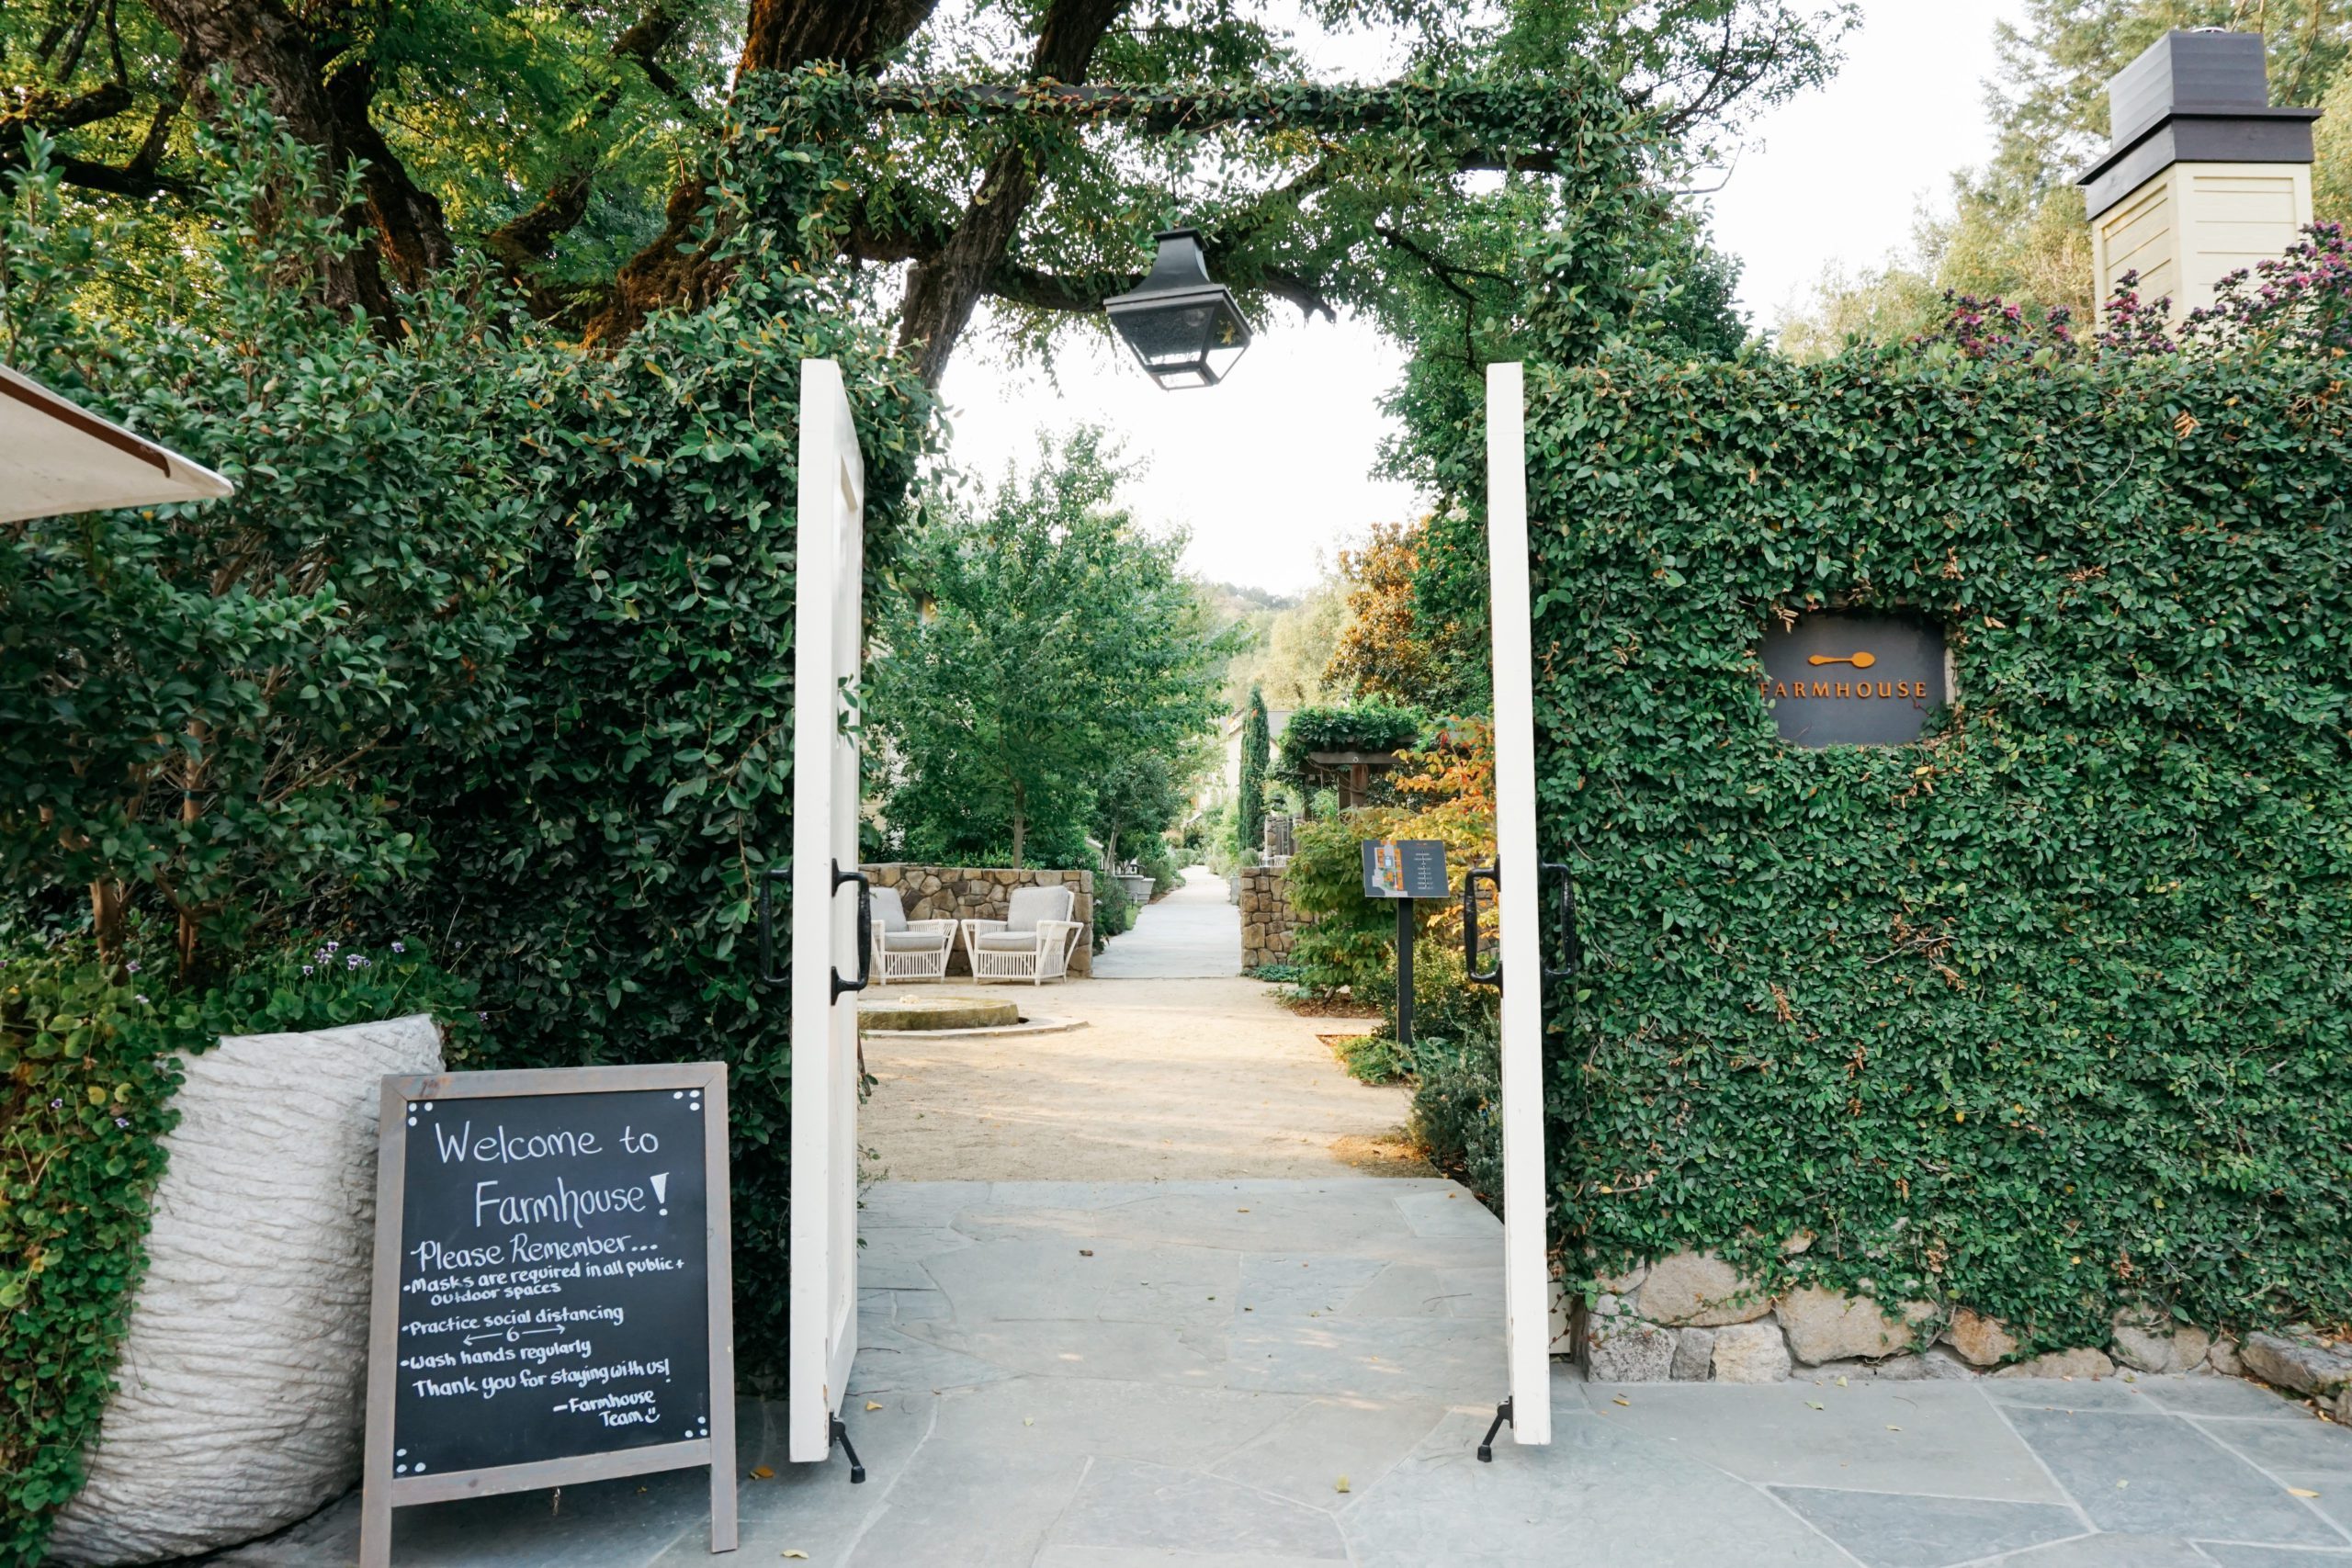 Farmhouse Inn is a boutique hotel in Sonoma and a perfect weekend getaway